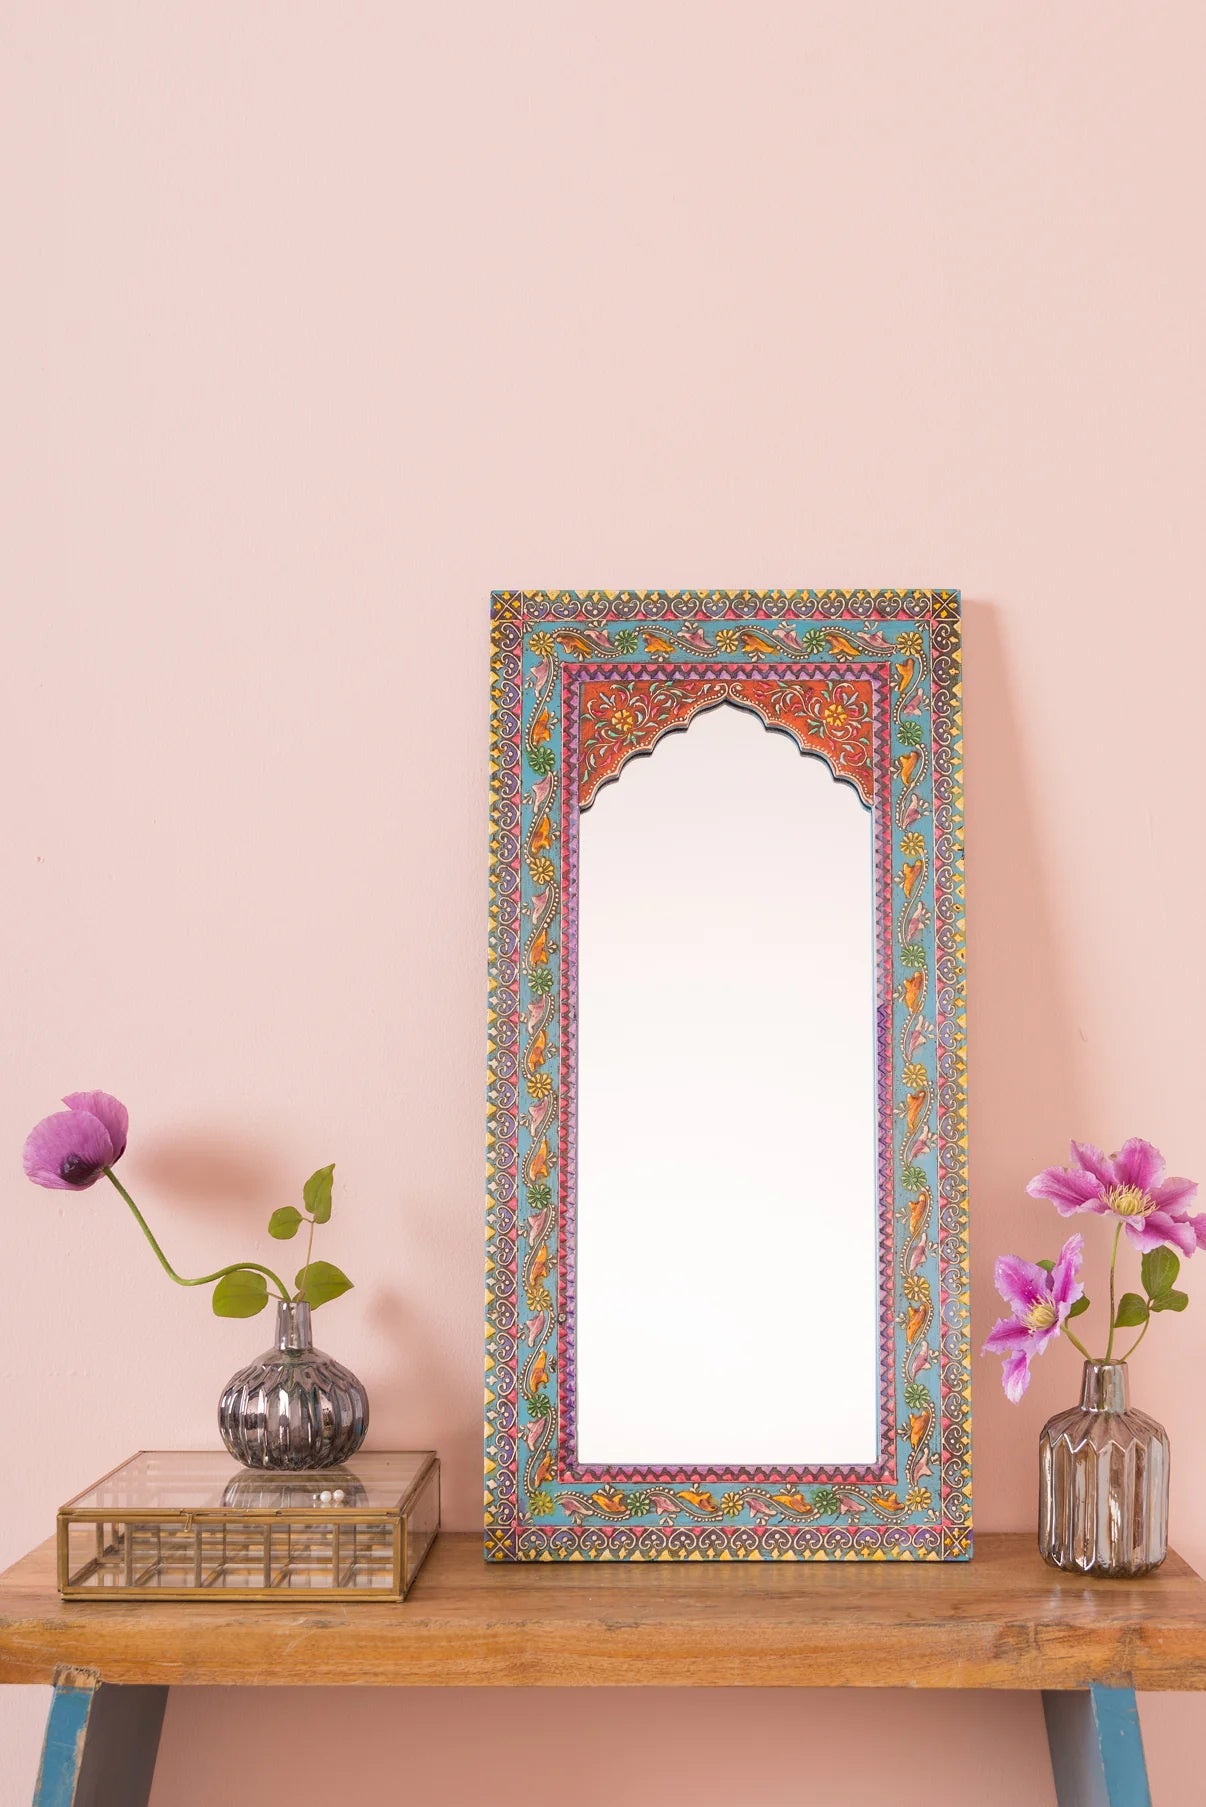 Highly Decorative Arched Wooden Mirror with Mehandi Work